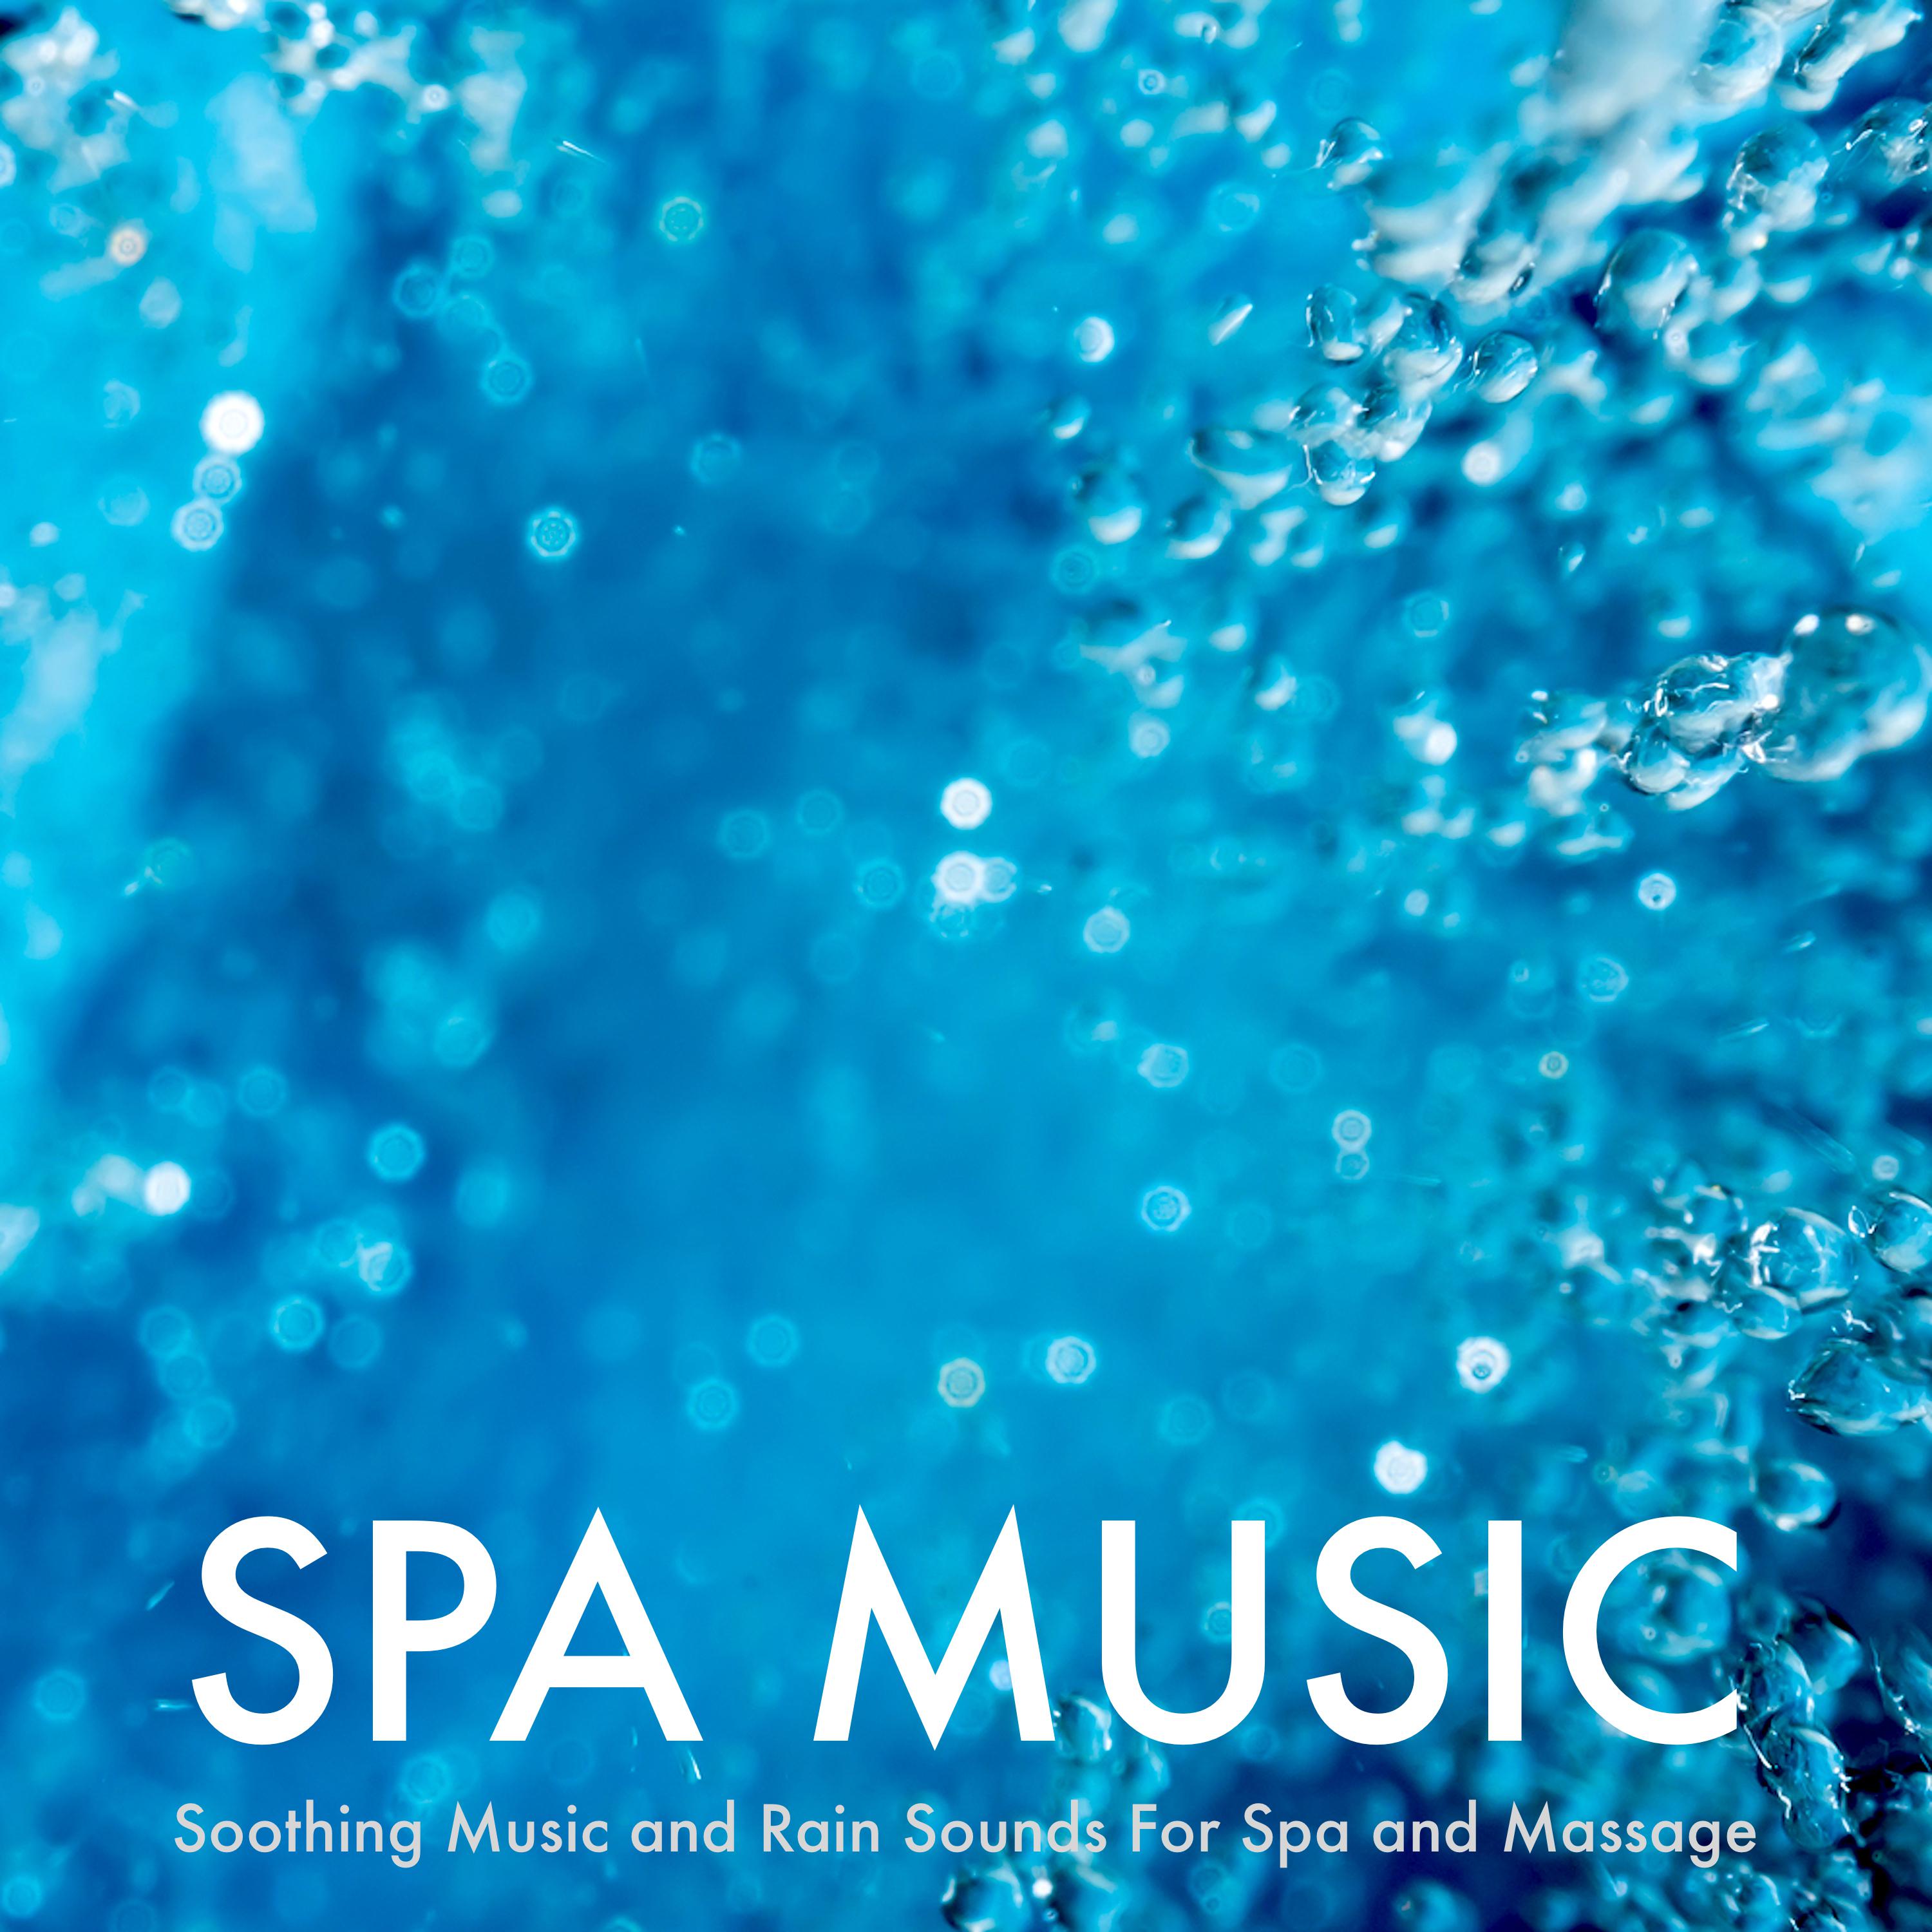 Spa Music: Soothing Music and Rain Sounds For Spa and Massage